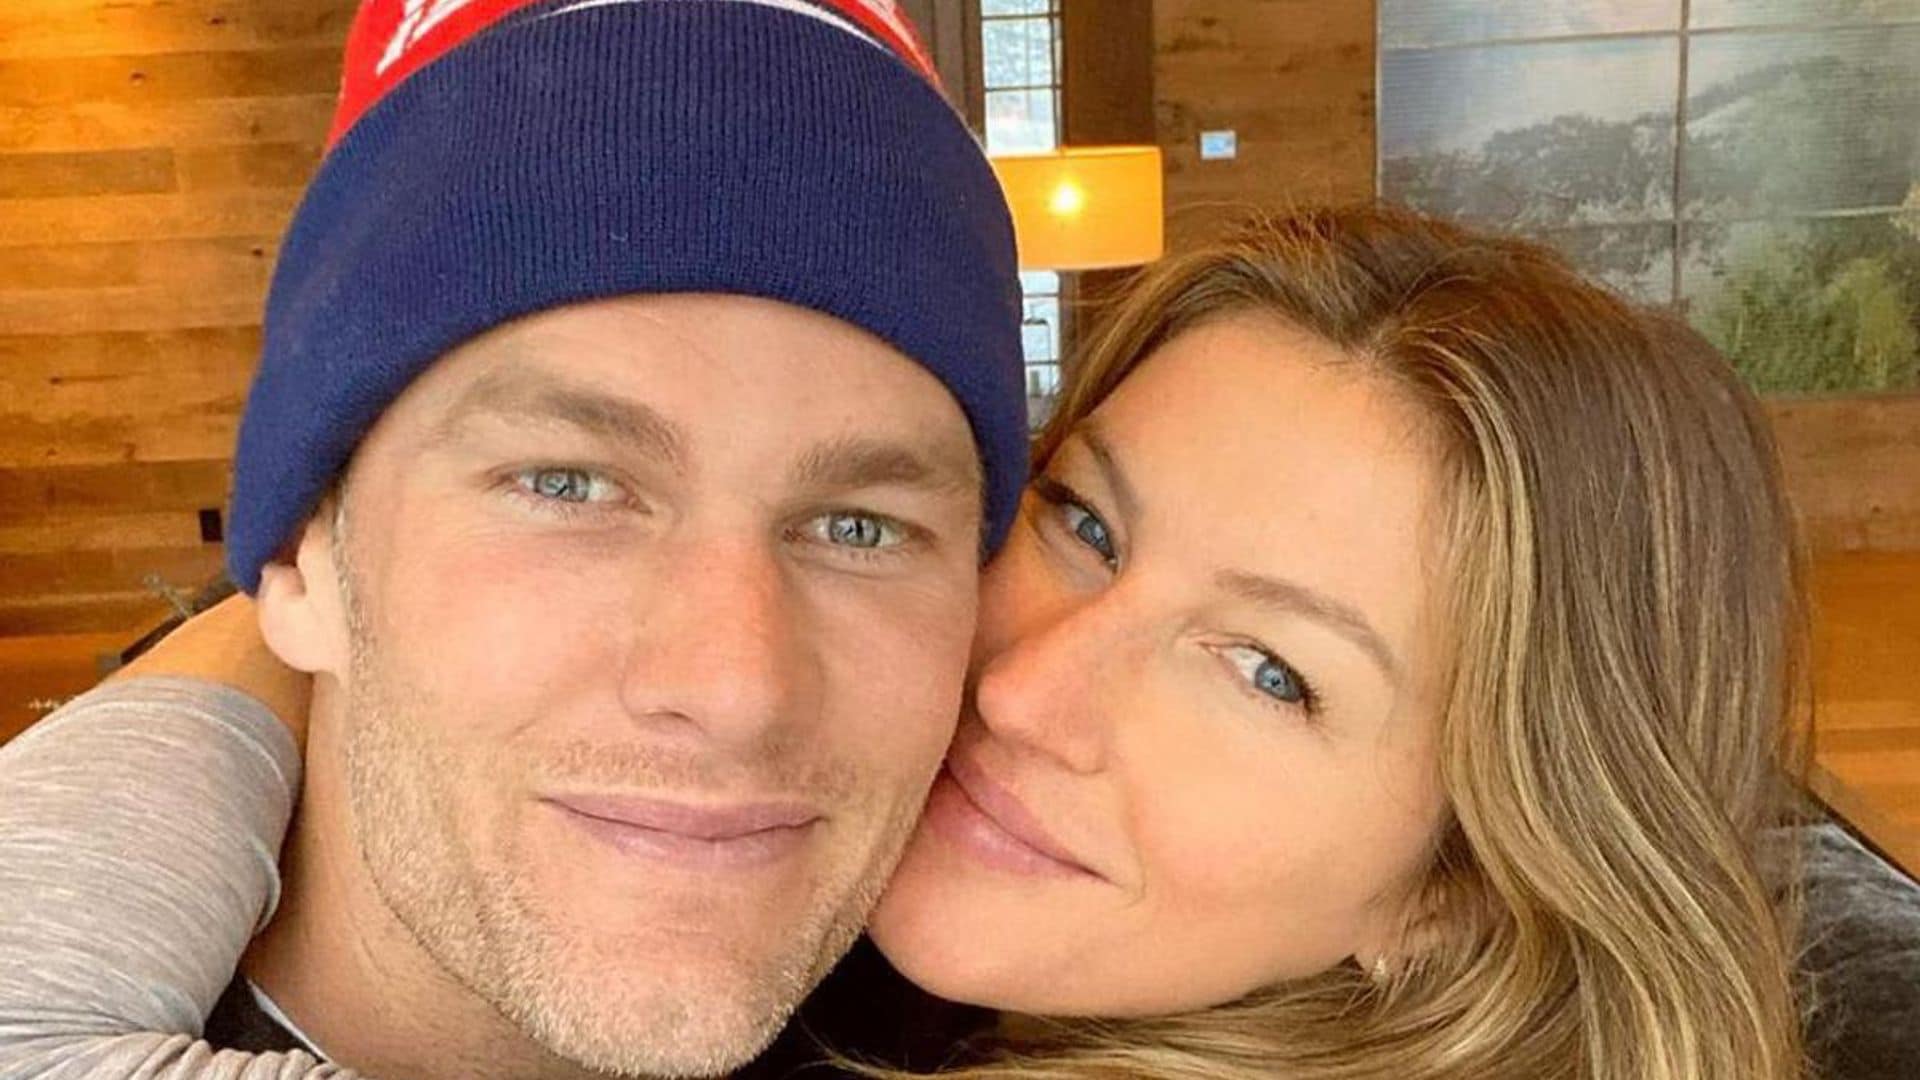 Tom Brady says Gisele Bundchen ‘deserves what she needs’ from him as a husband while discussing retirement